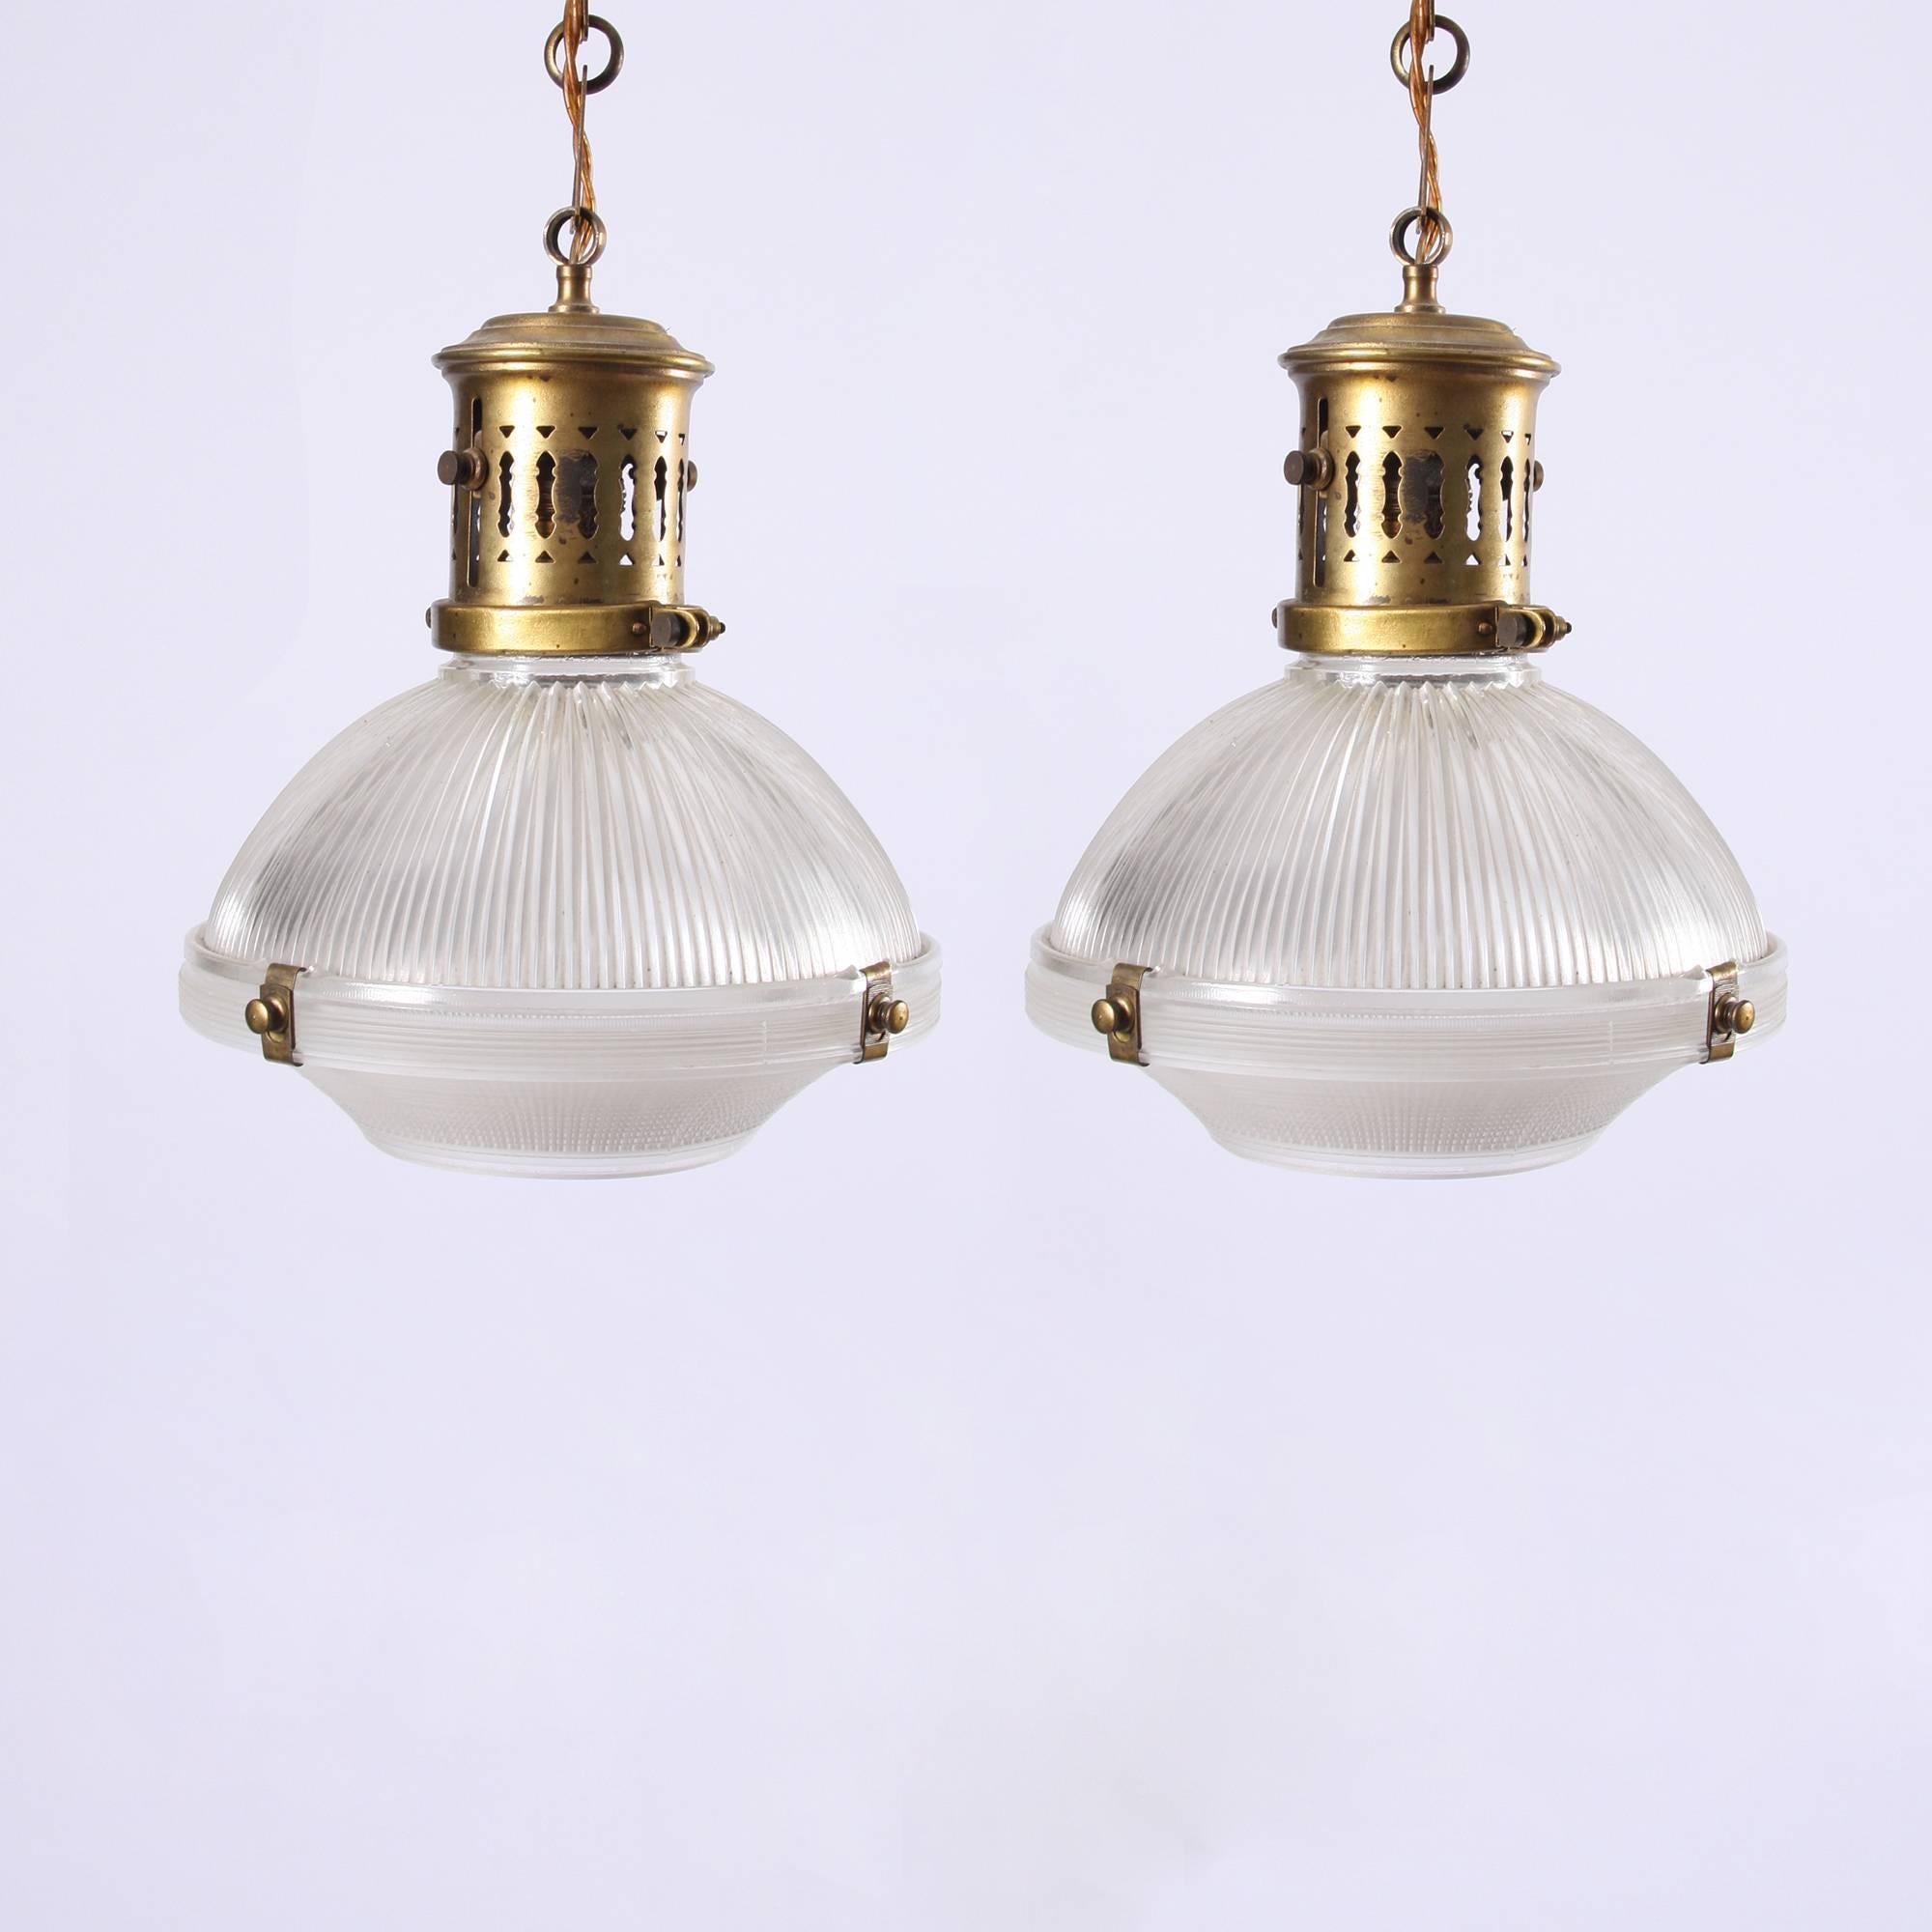 English, mid-20th century

Pair of Holophane lamps with perforated brass gallery. Rewired and PAT tested.